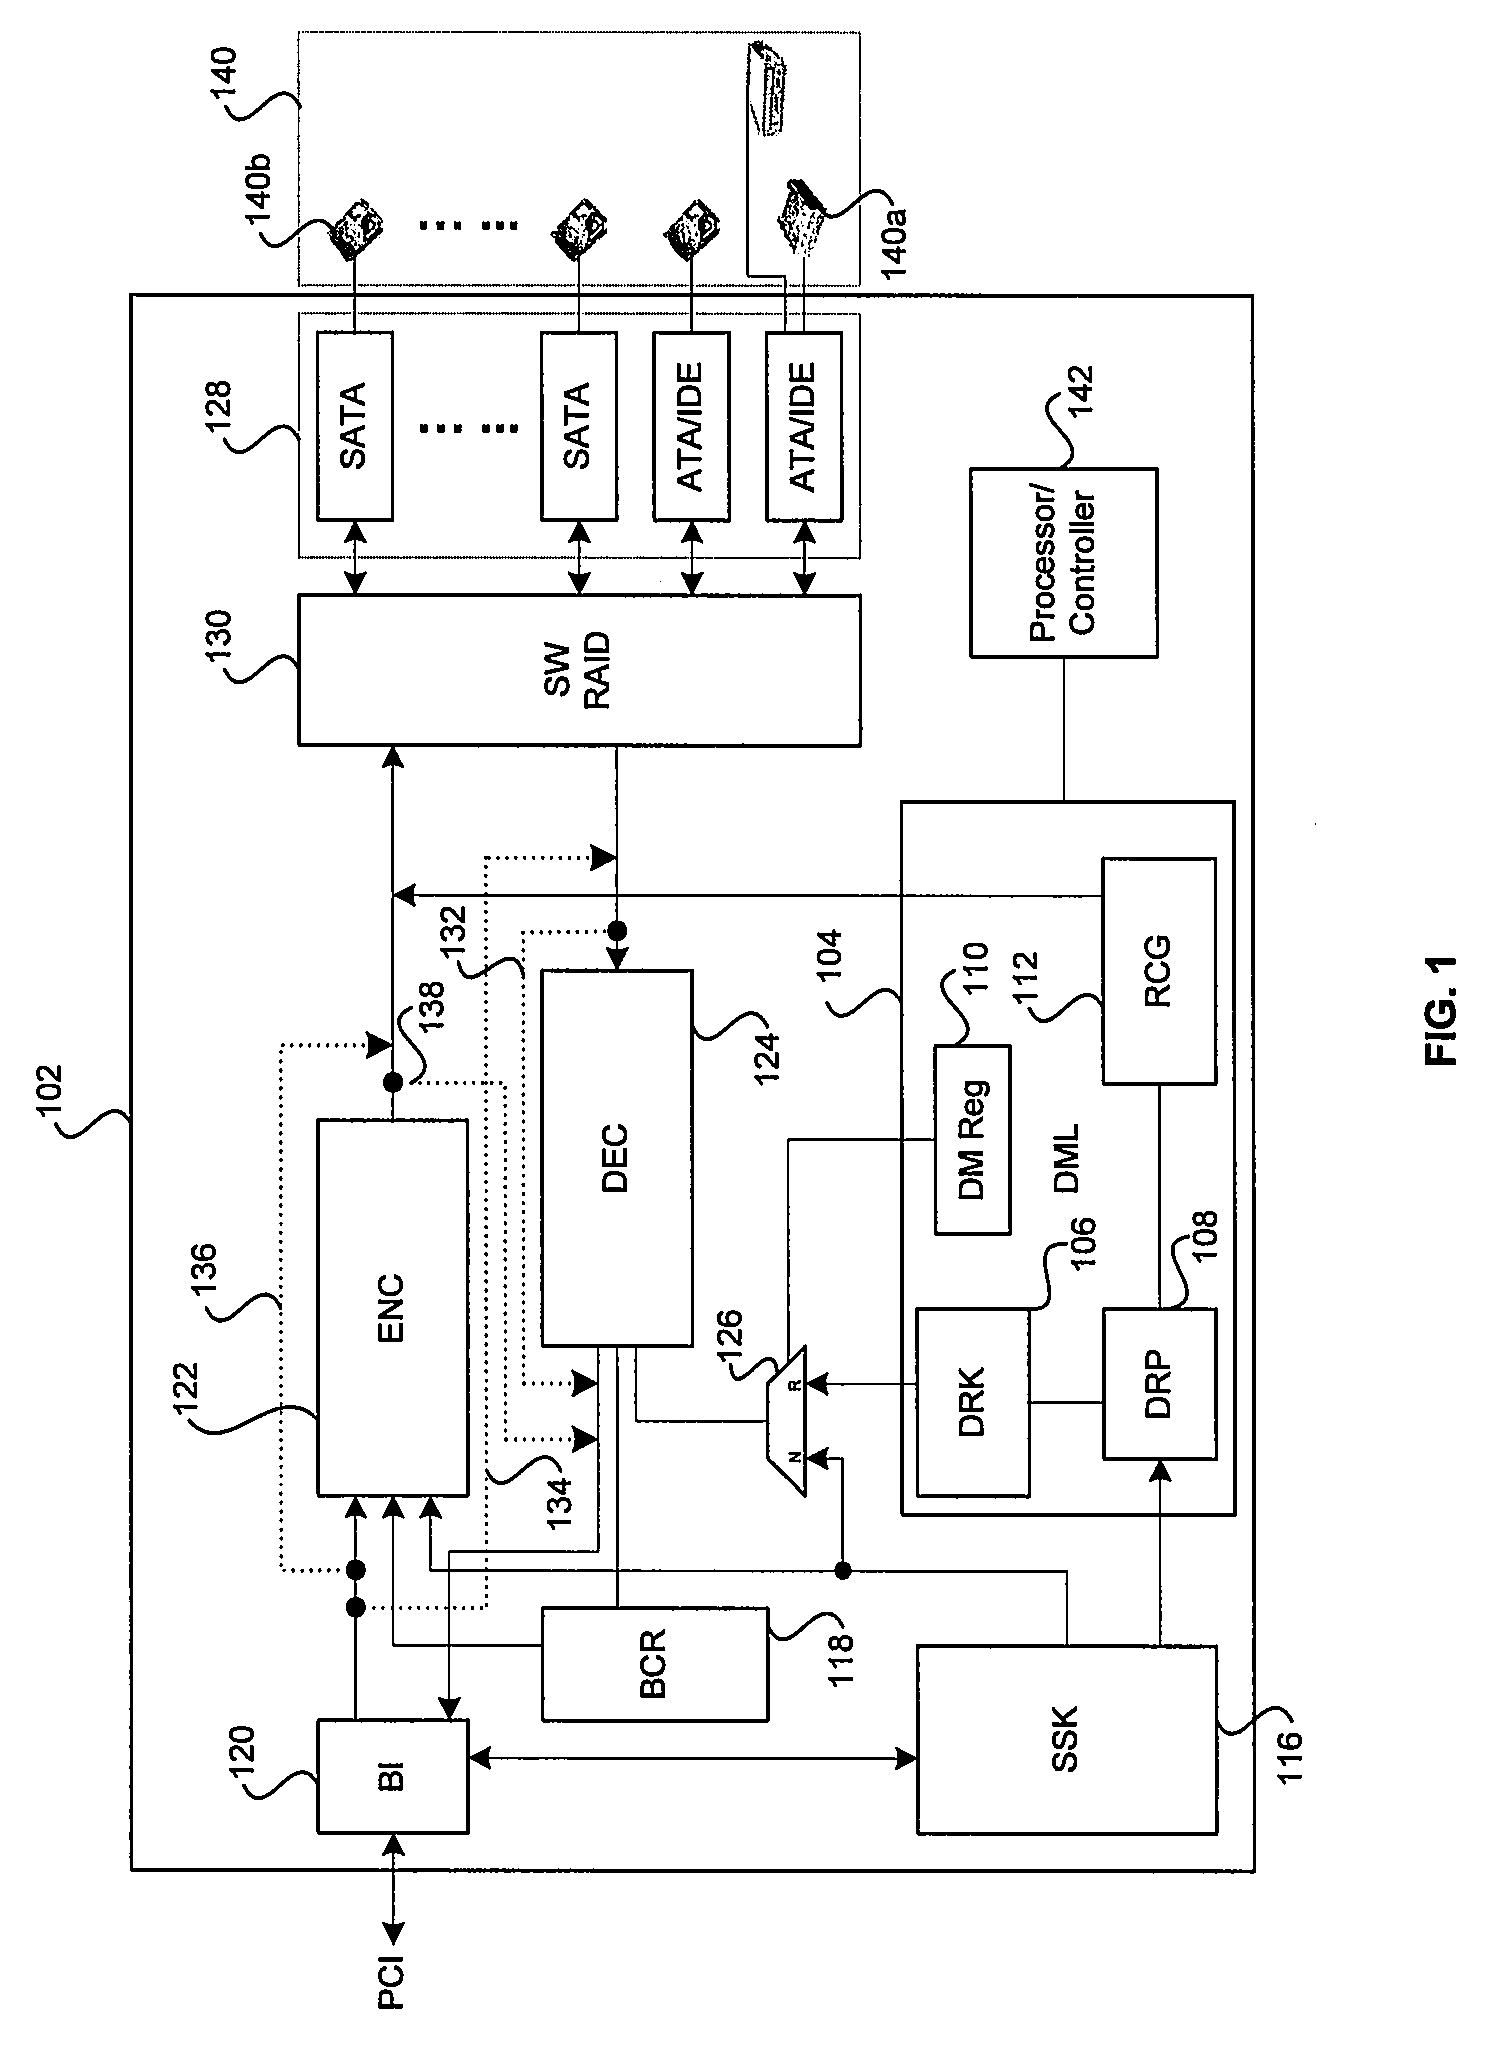 Method and system for disaster recovery of data from a storage device